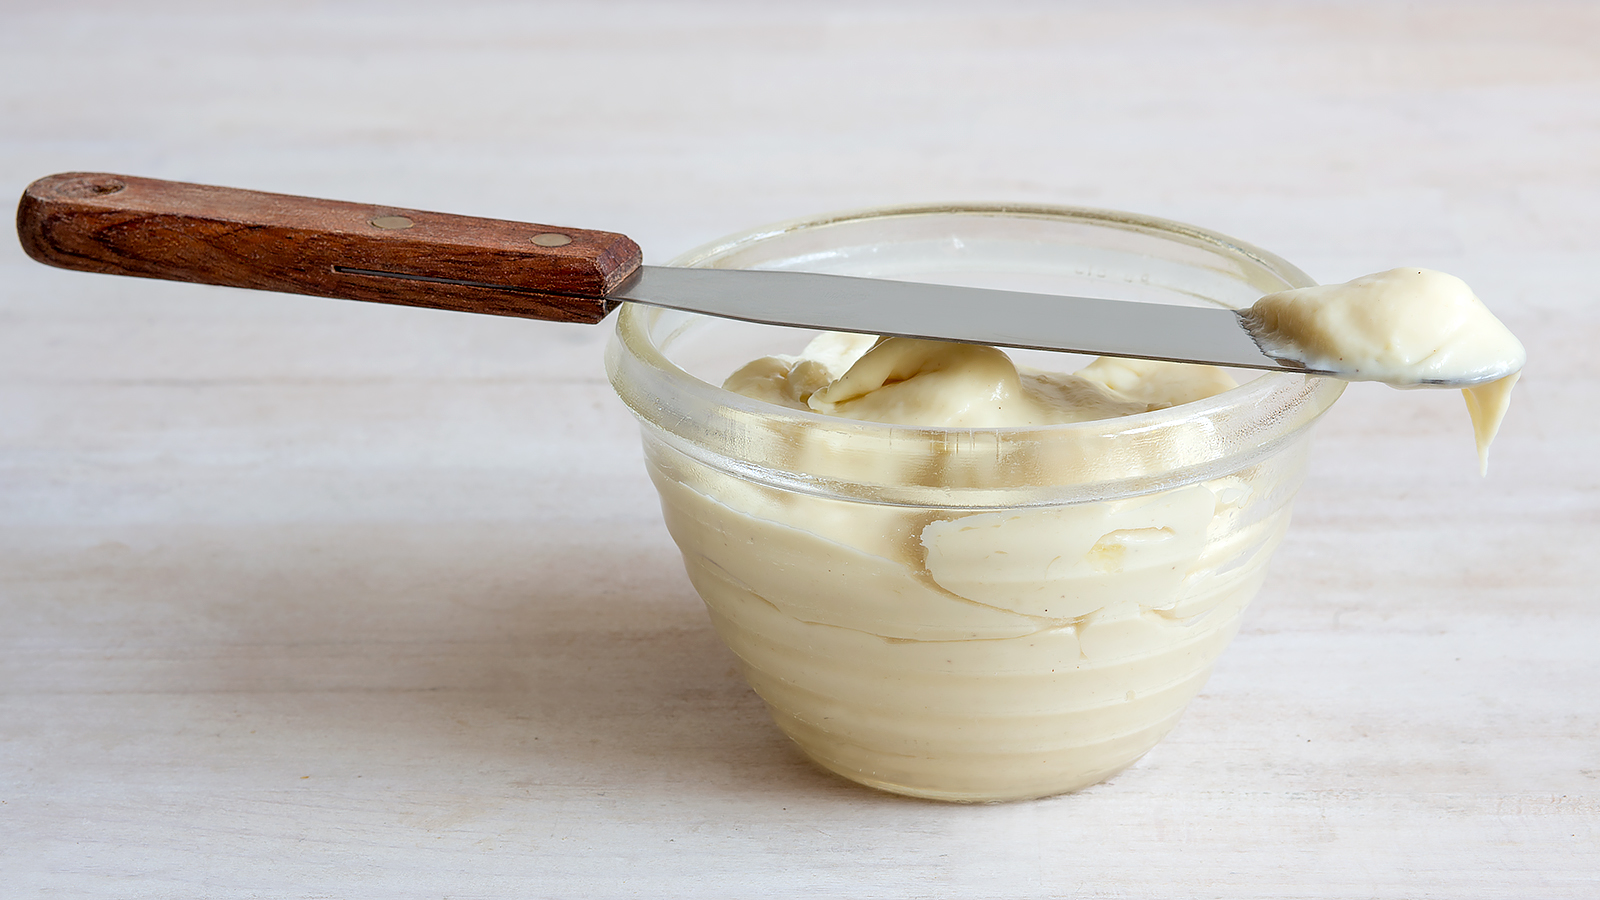 Cream sauce for pies and pastries